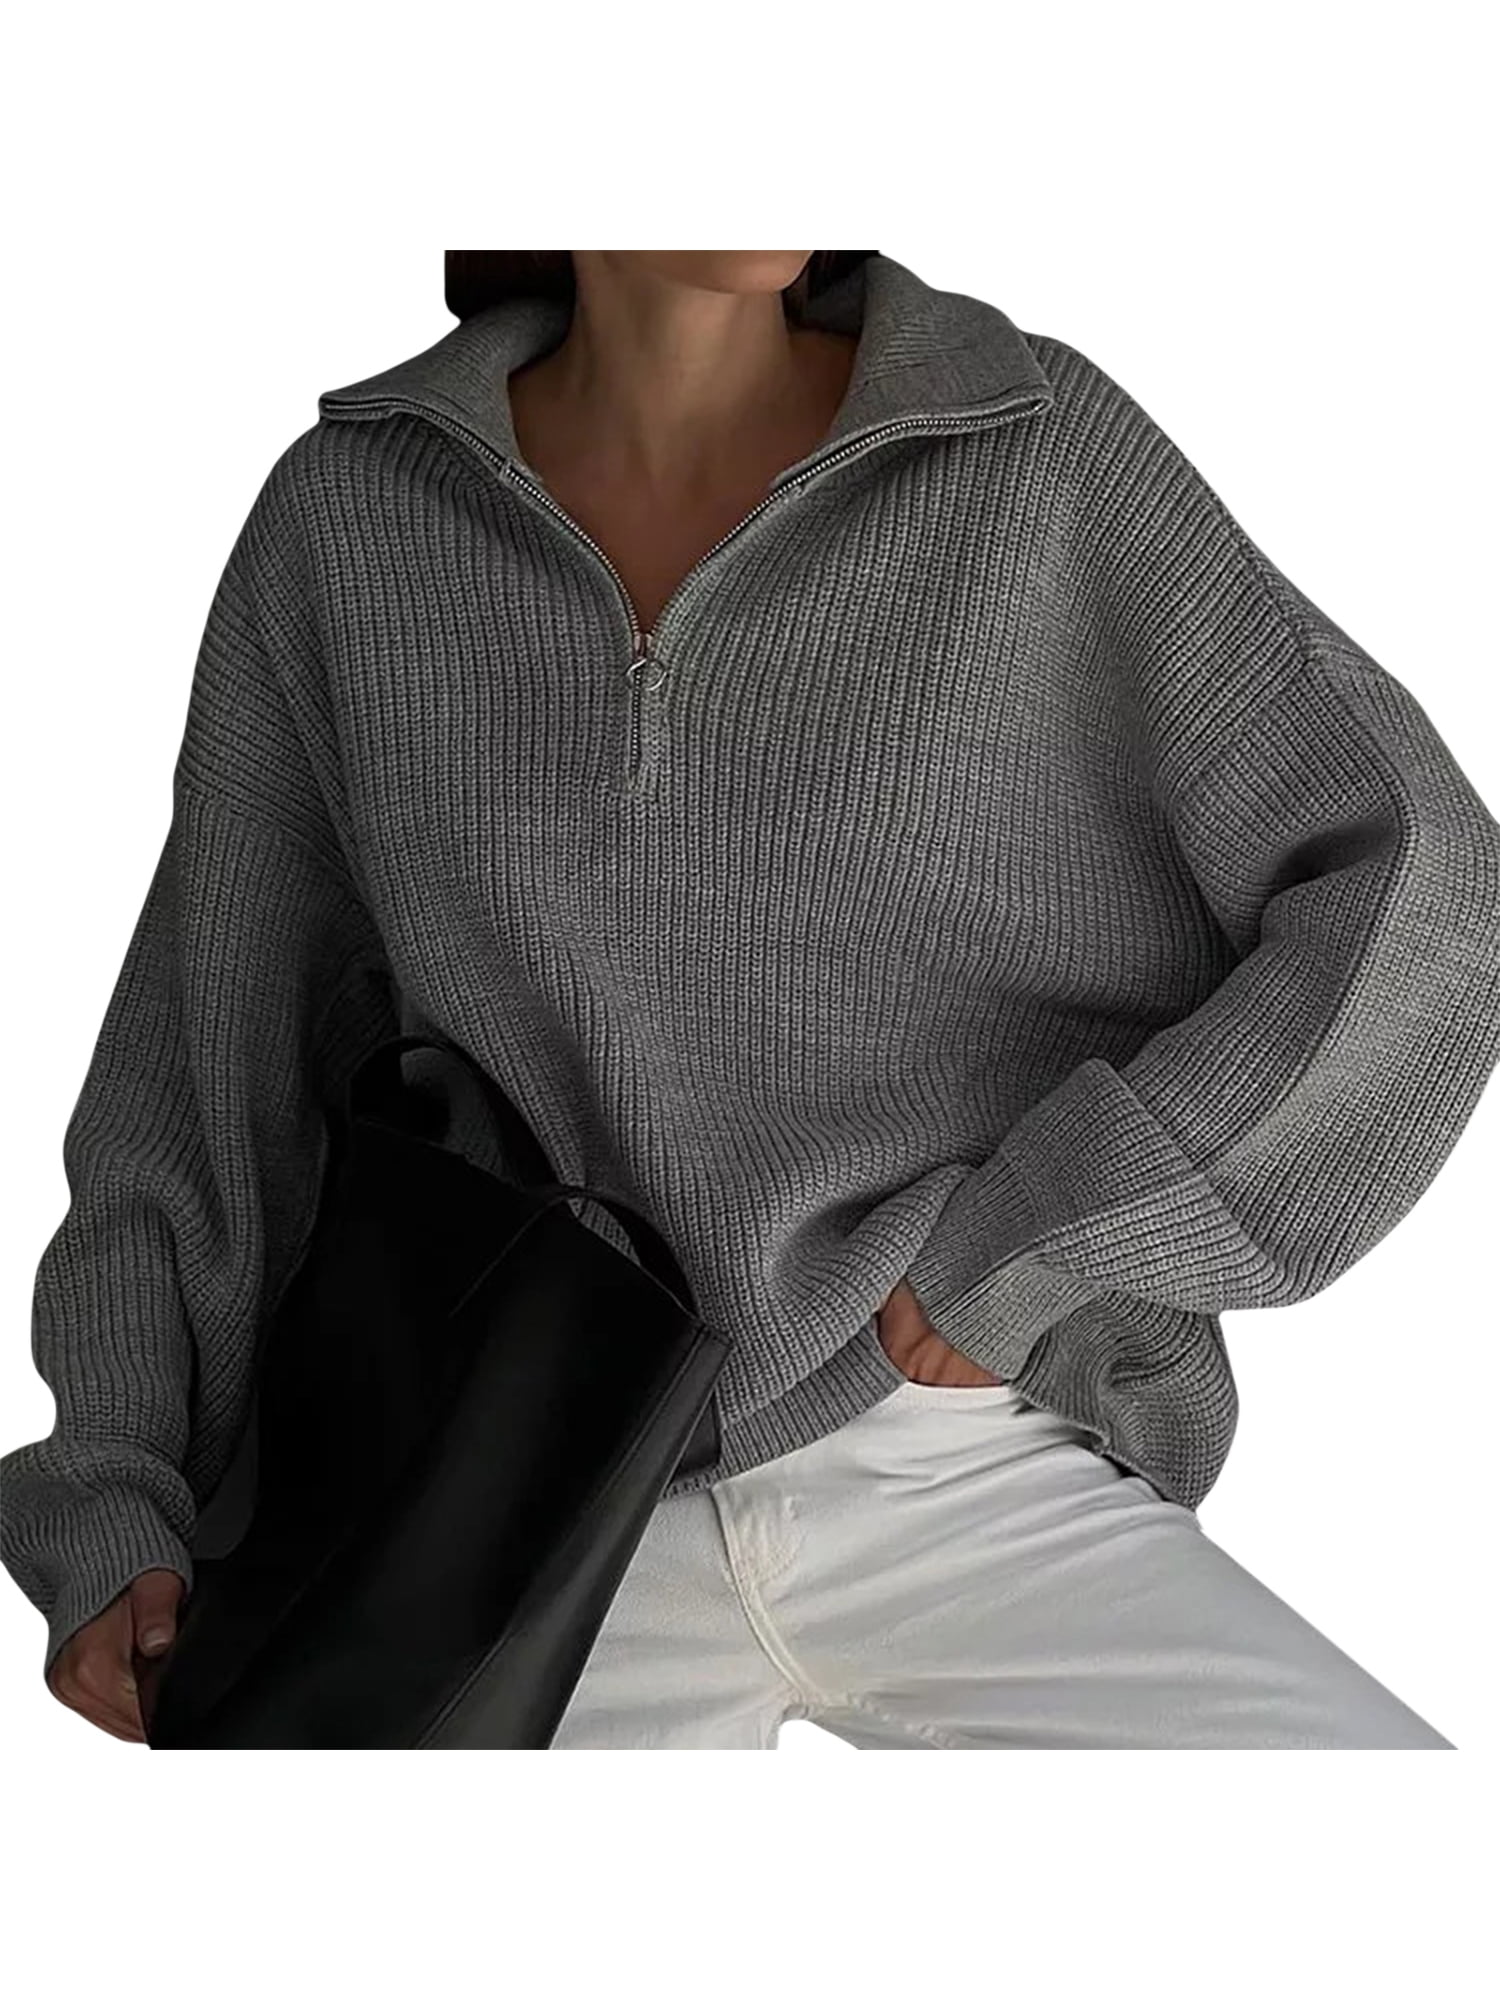 Sweaters V-Neck Knitwear Lapel Collar Women Sleeve AMILIEe Ribbed Jumper Knit Long Pullover Tops